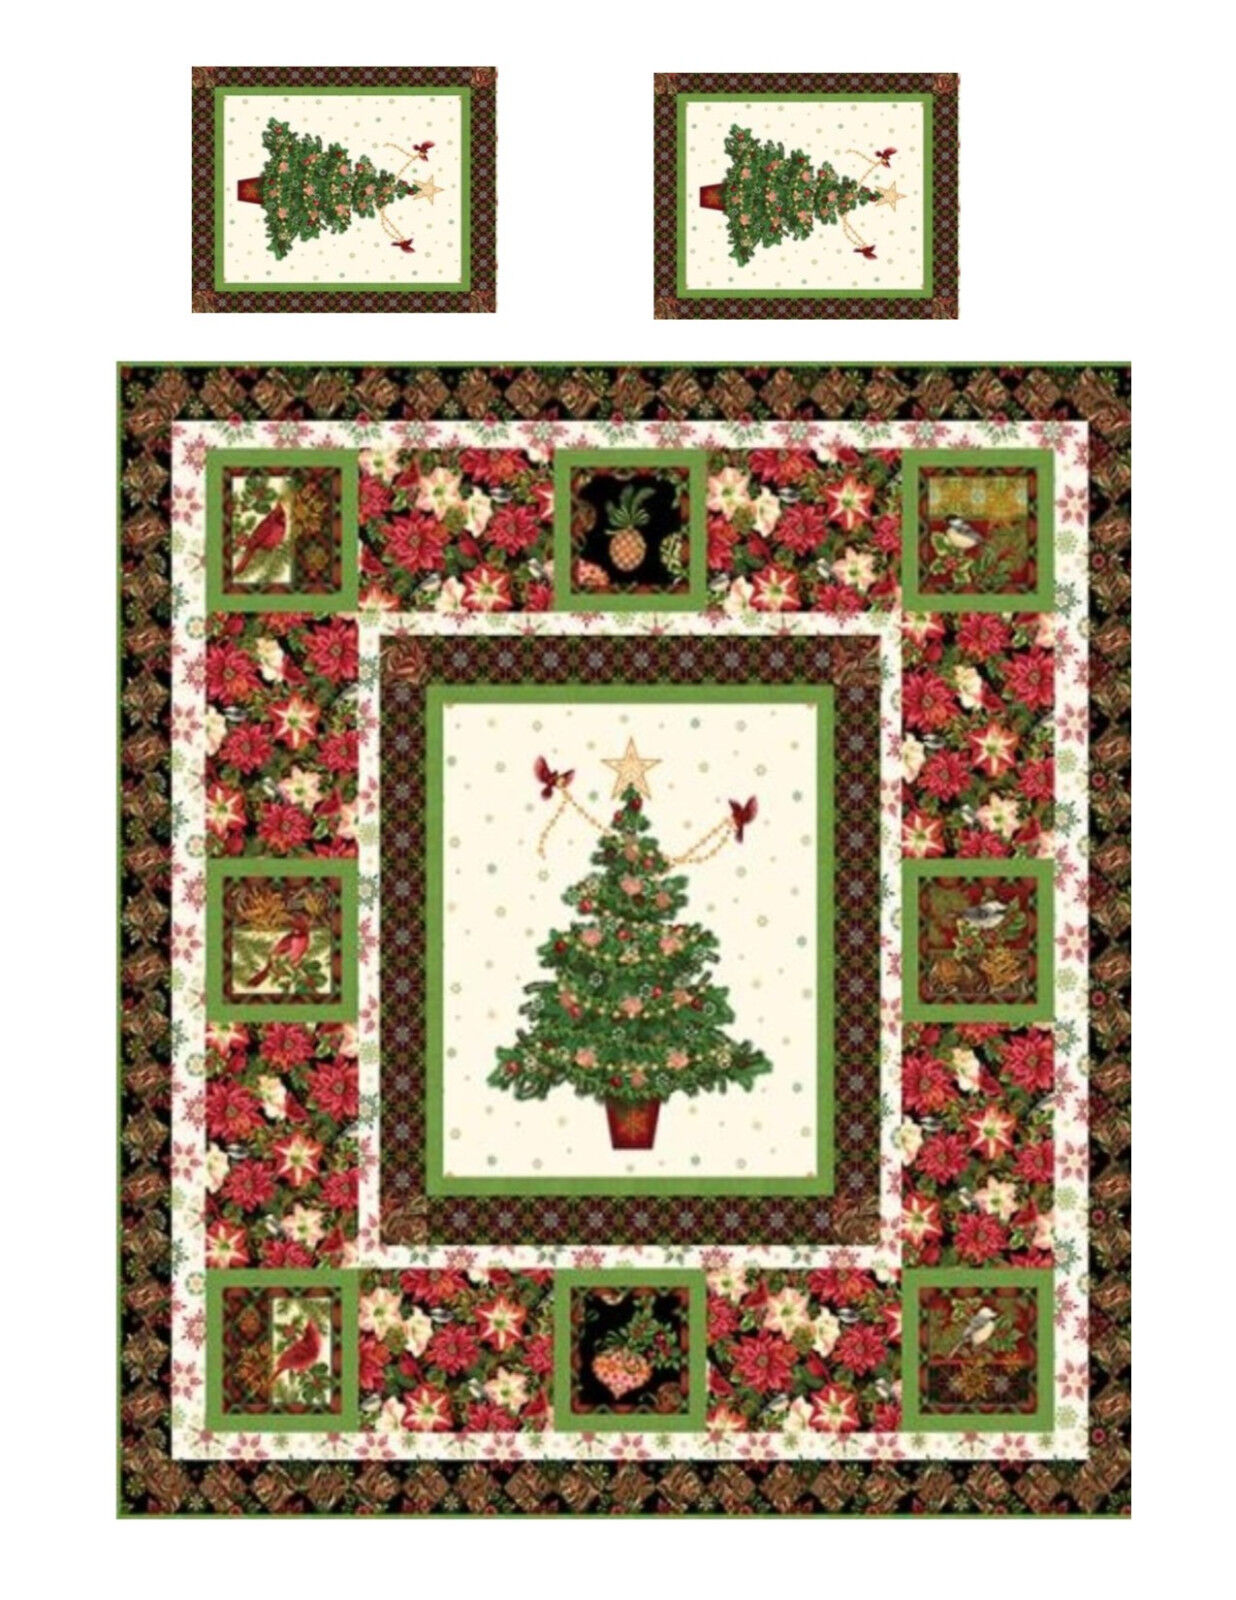 Miniature Dollhouse Christmas Tree Quilt Top Computer Printed Fabric 2 pillows 9